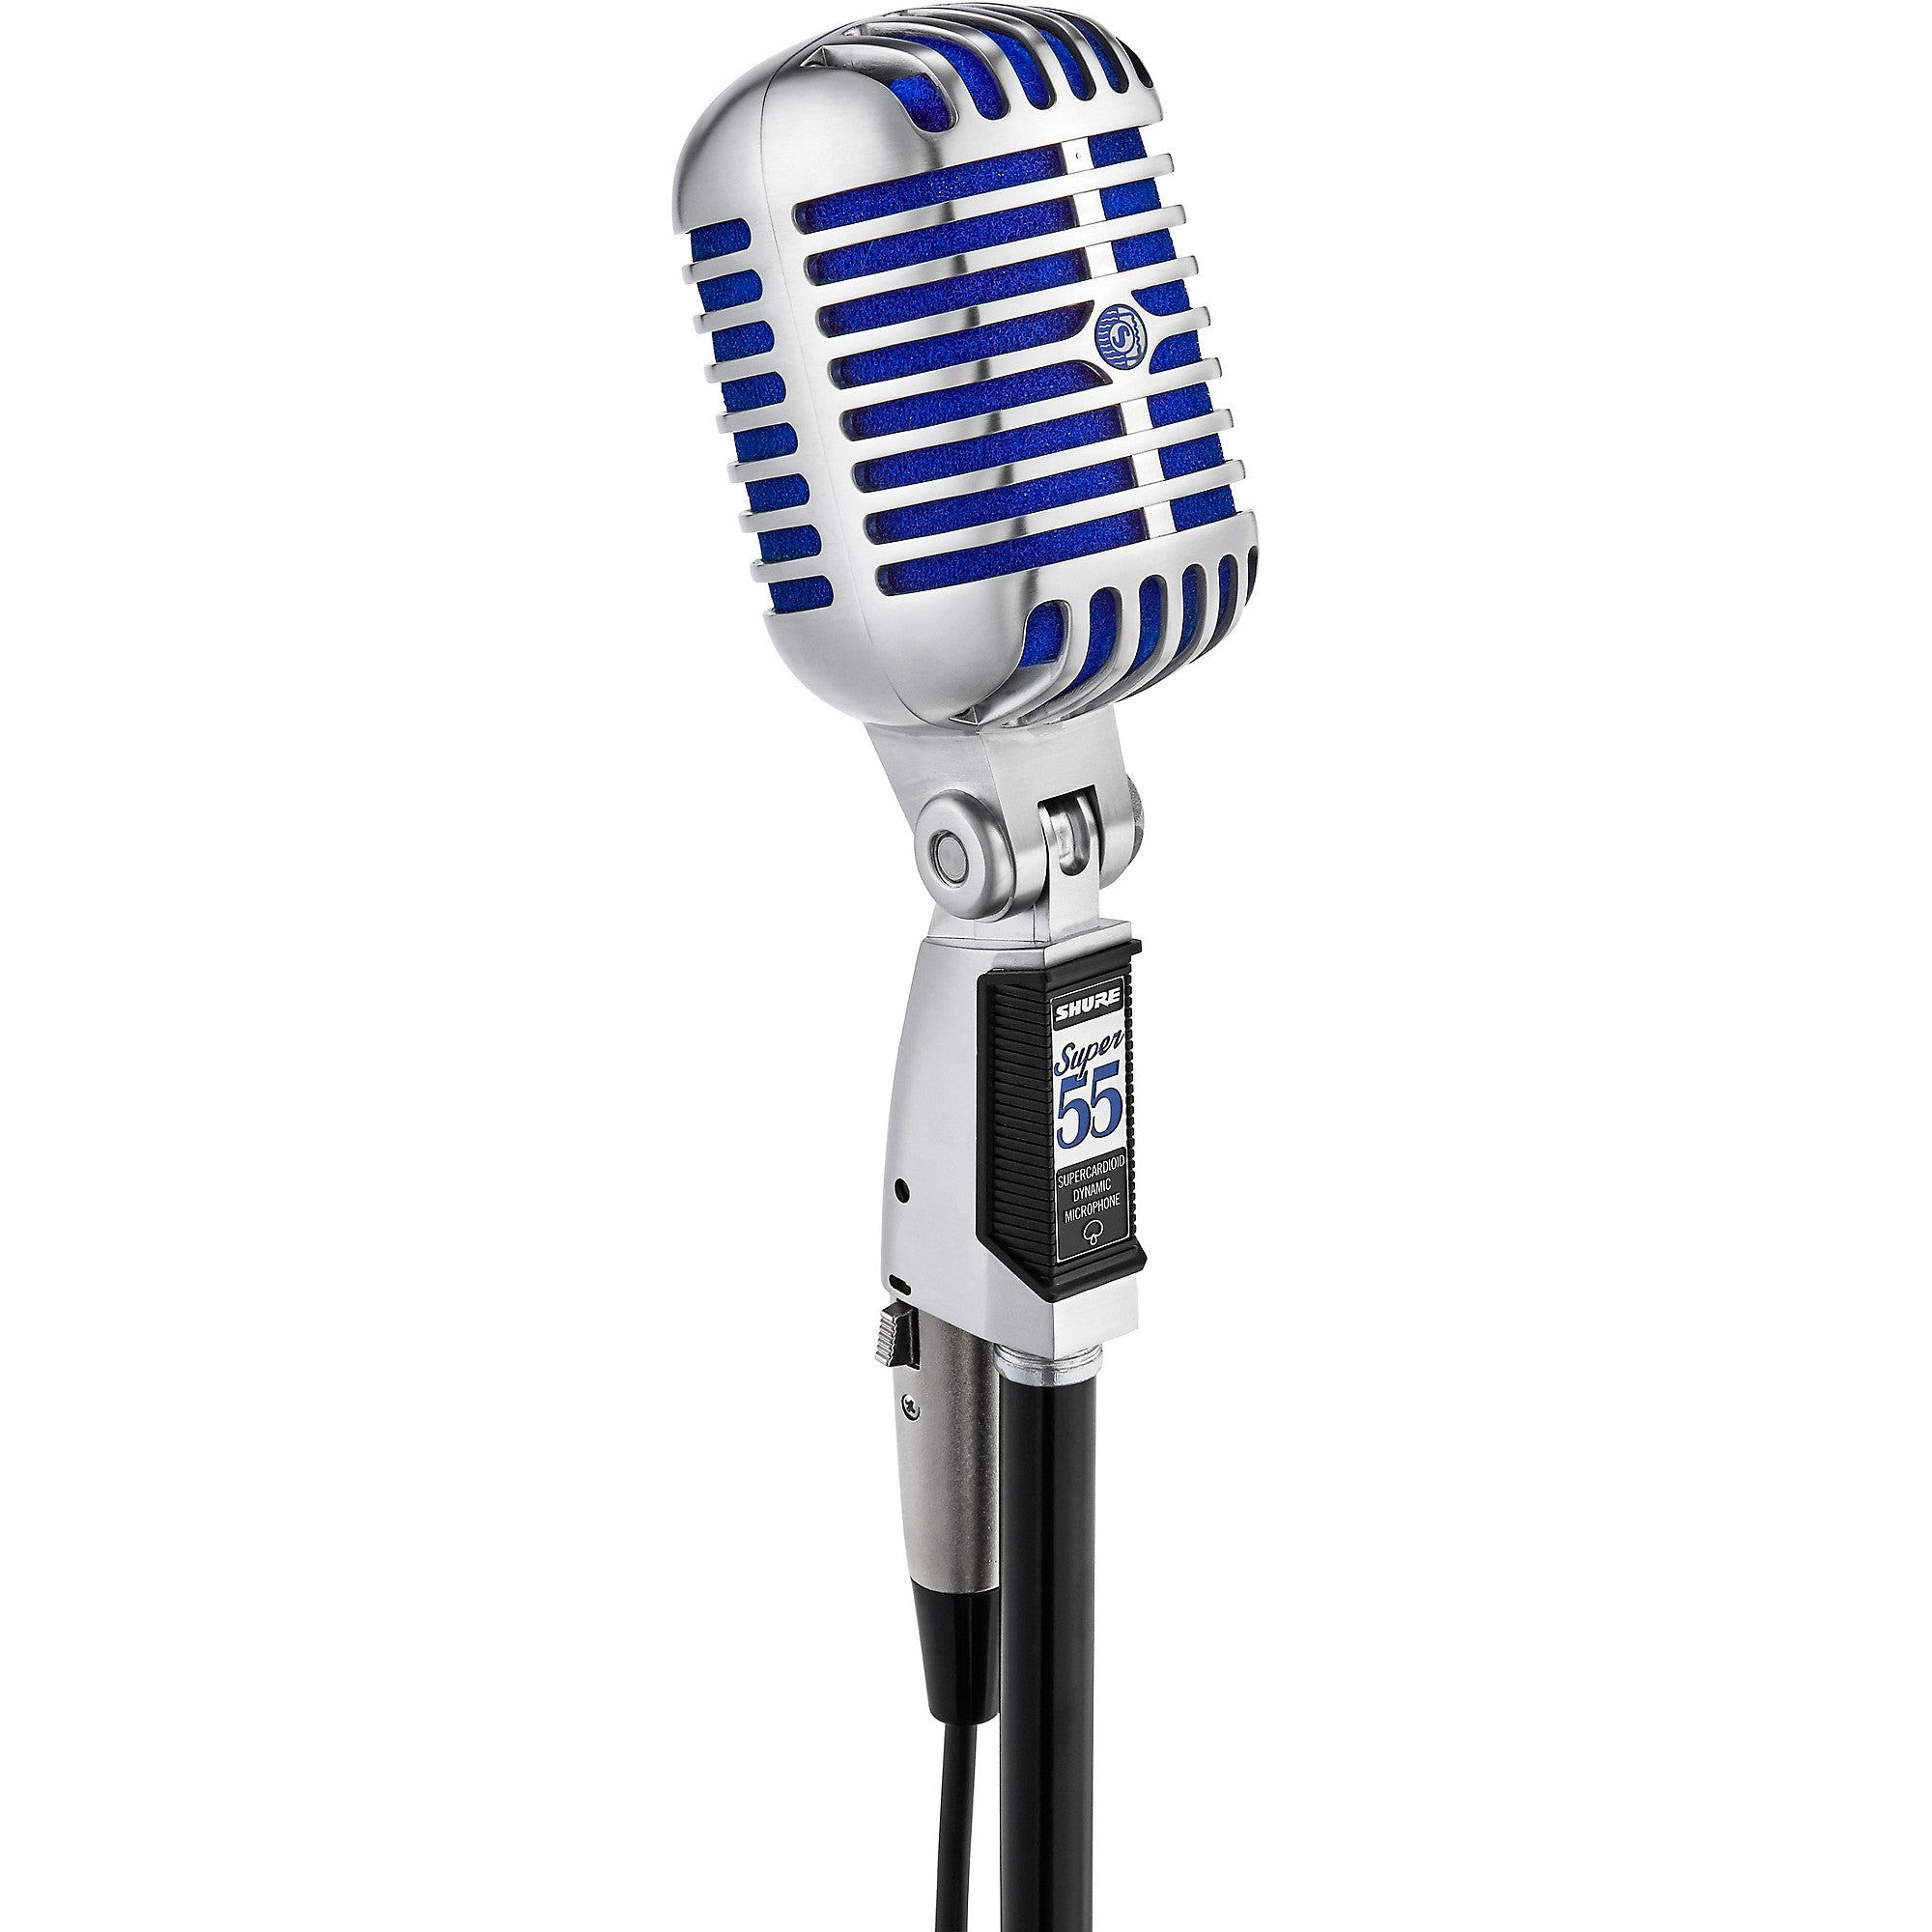 SHURE SUPER 55 DELUXE SUPERCARDIOID DYNAMIC MICROPHONE - CHROME